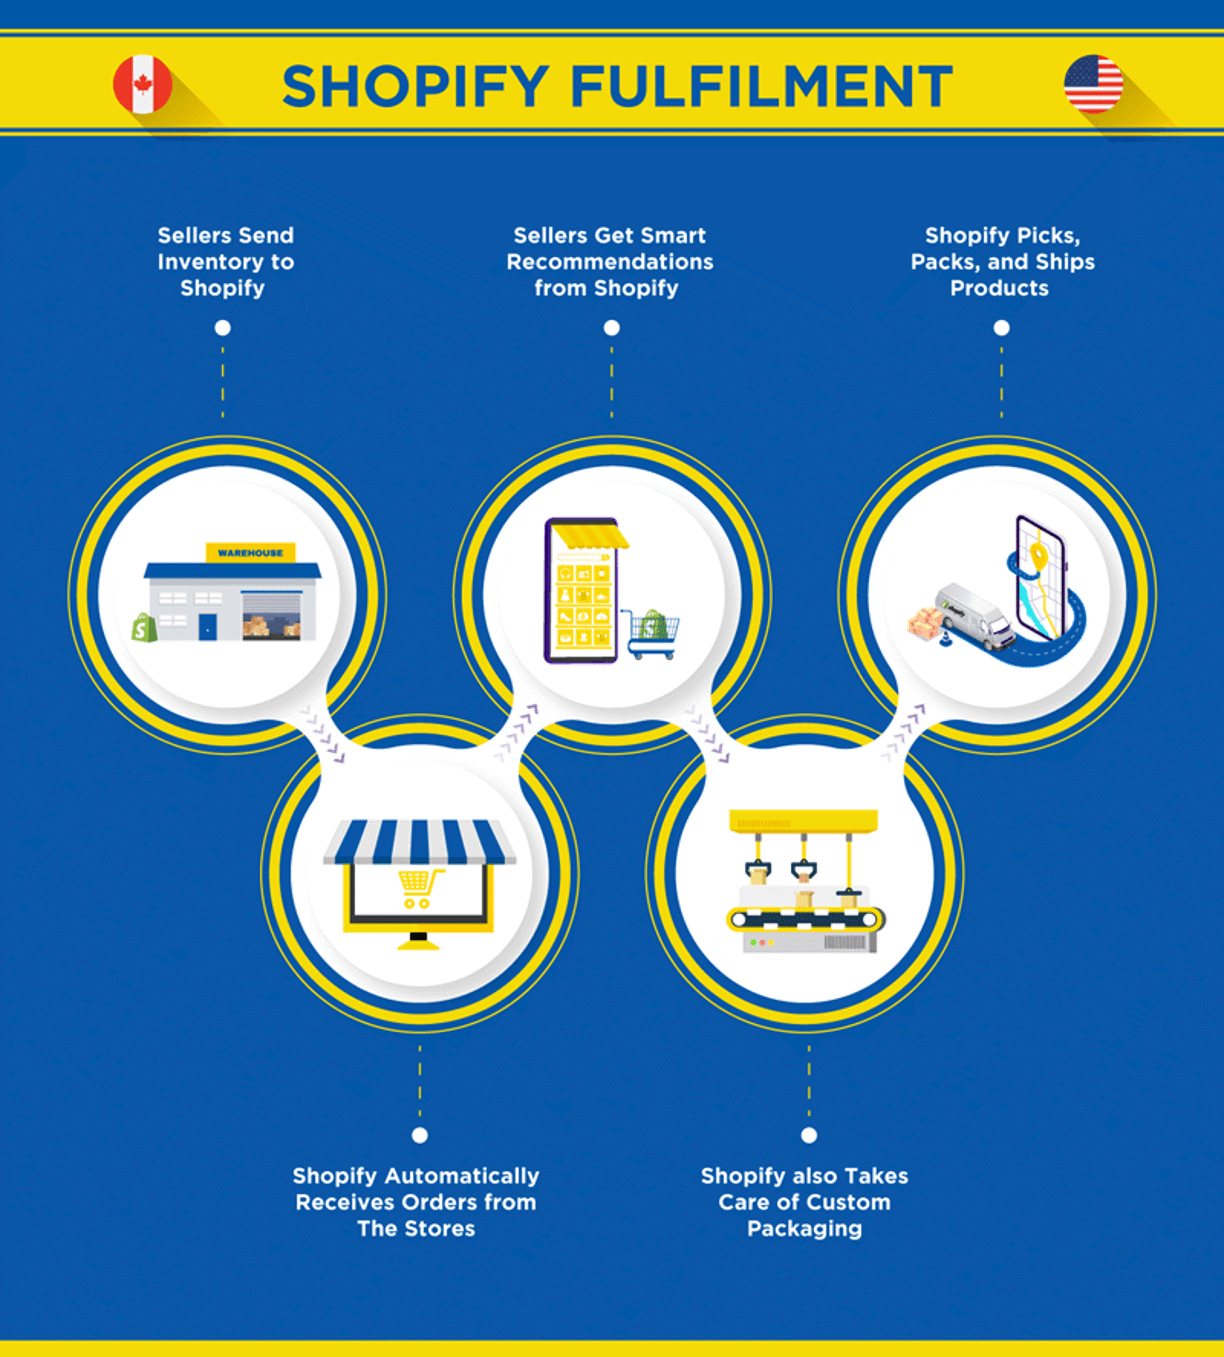 3Pl Fba Or Shopify Fulfilment Image4